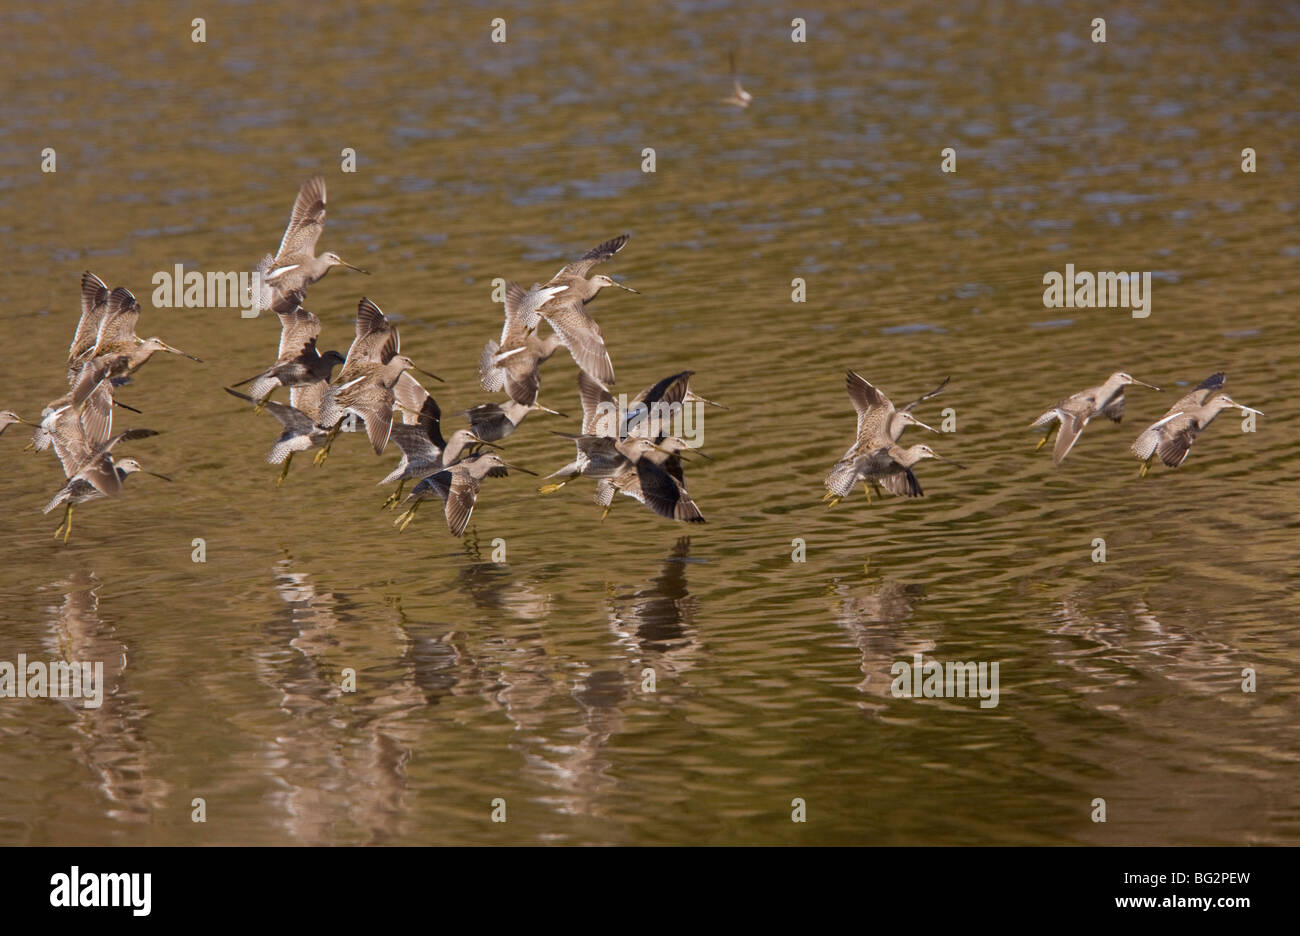 Flock of Long-billed Dowitchers Limnodromus scolopaceus in flight, California, United States Stock Photo